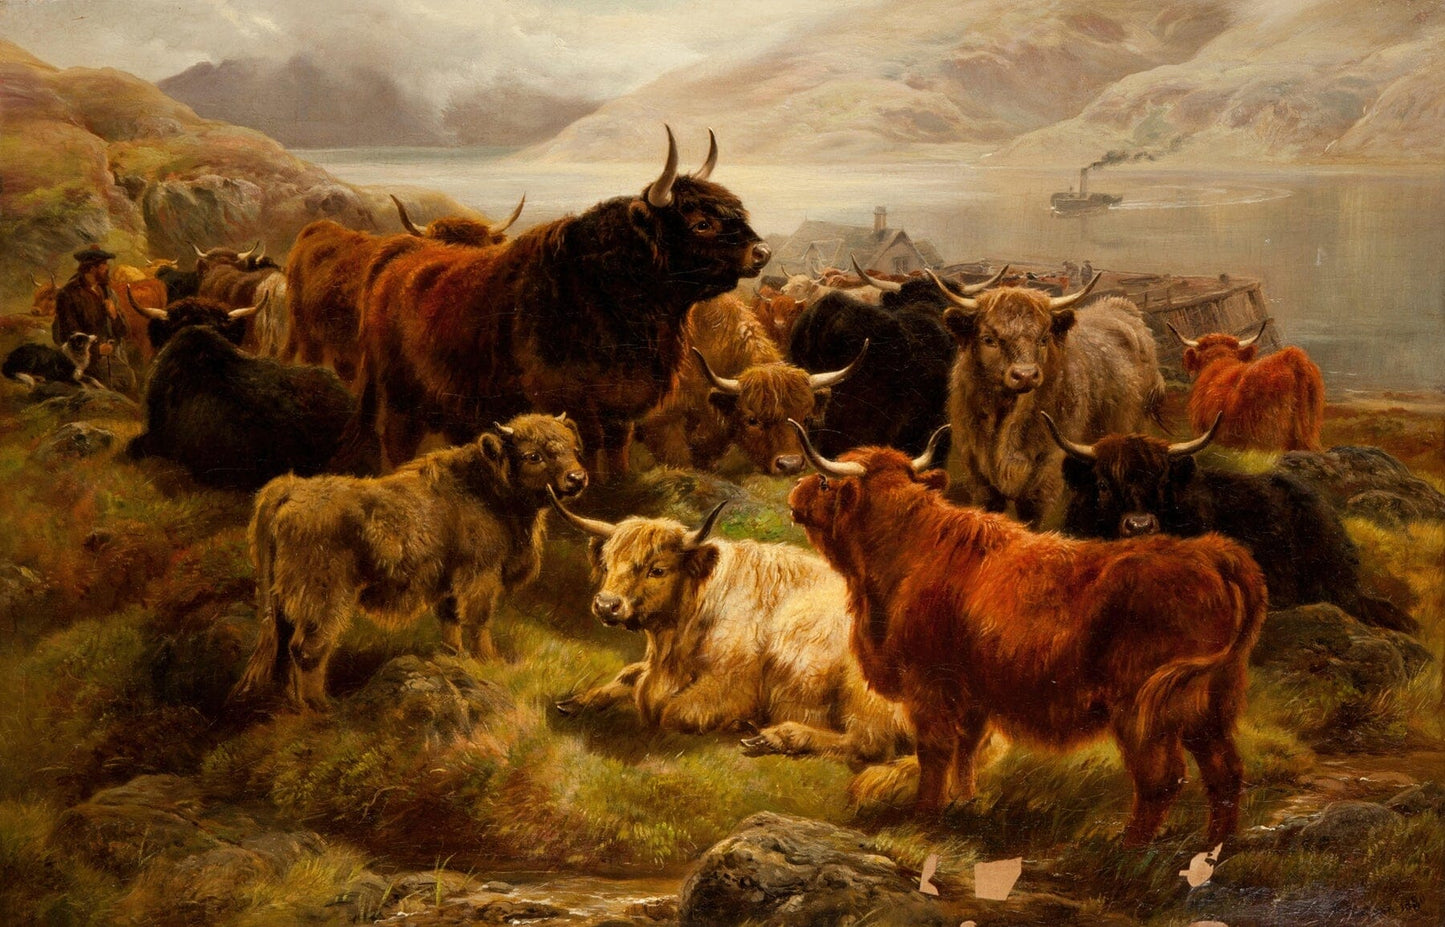 Highland Cattle (1800s) | Cow art | William Watson Posters, Prints, & Visual Artwork The Trumpet Shop   